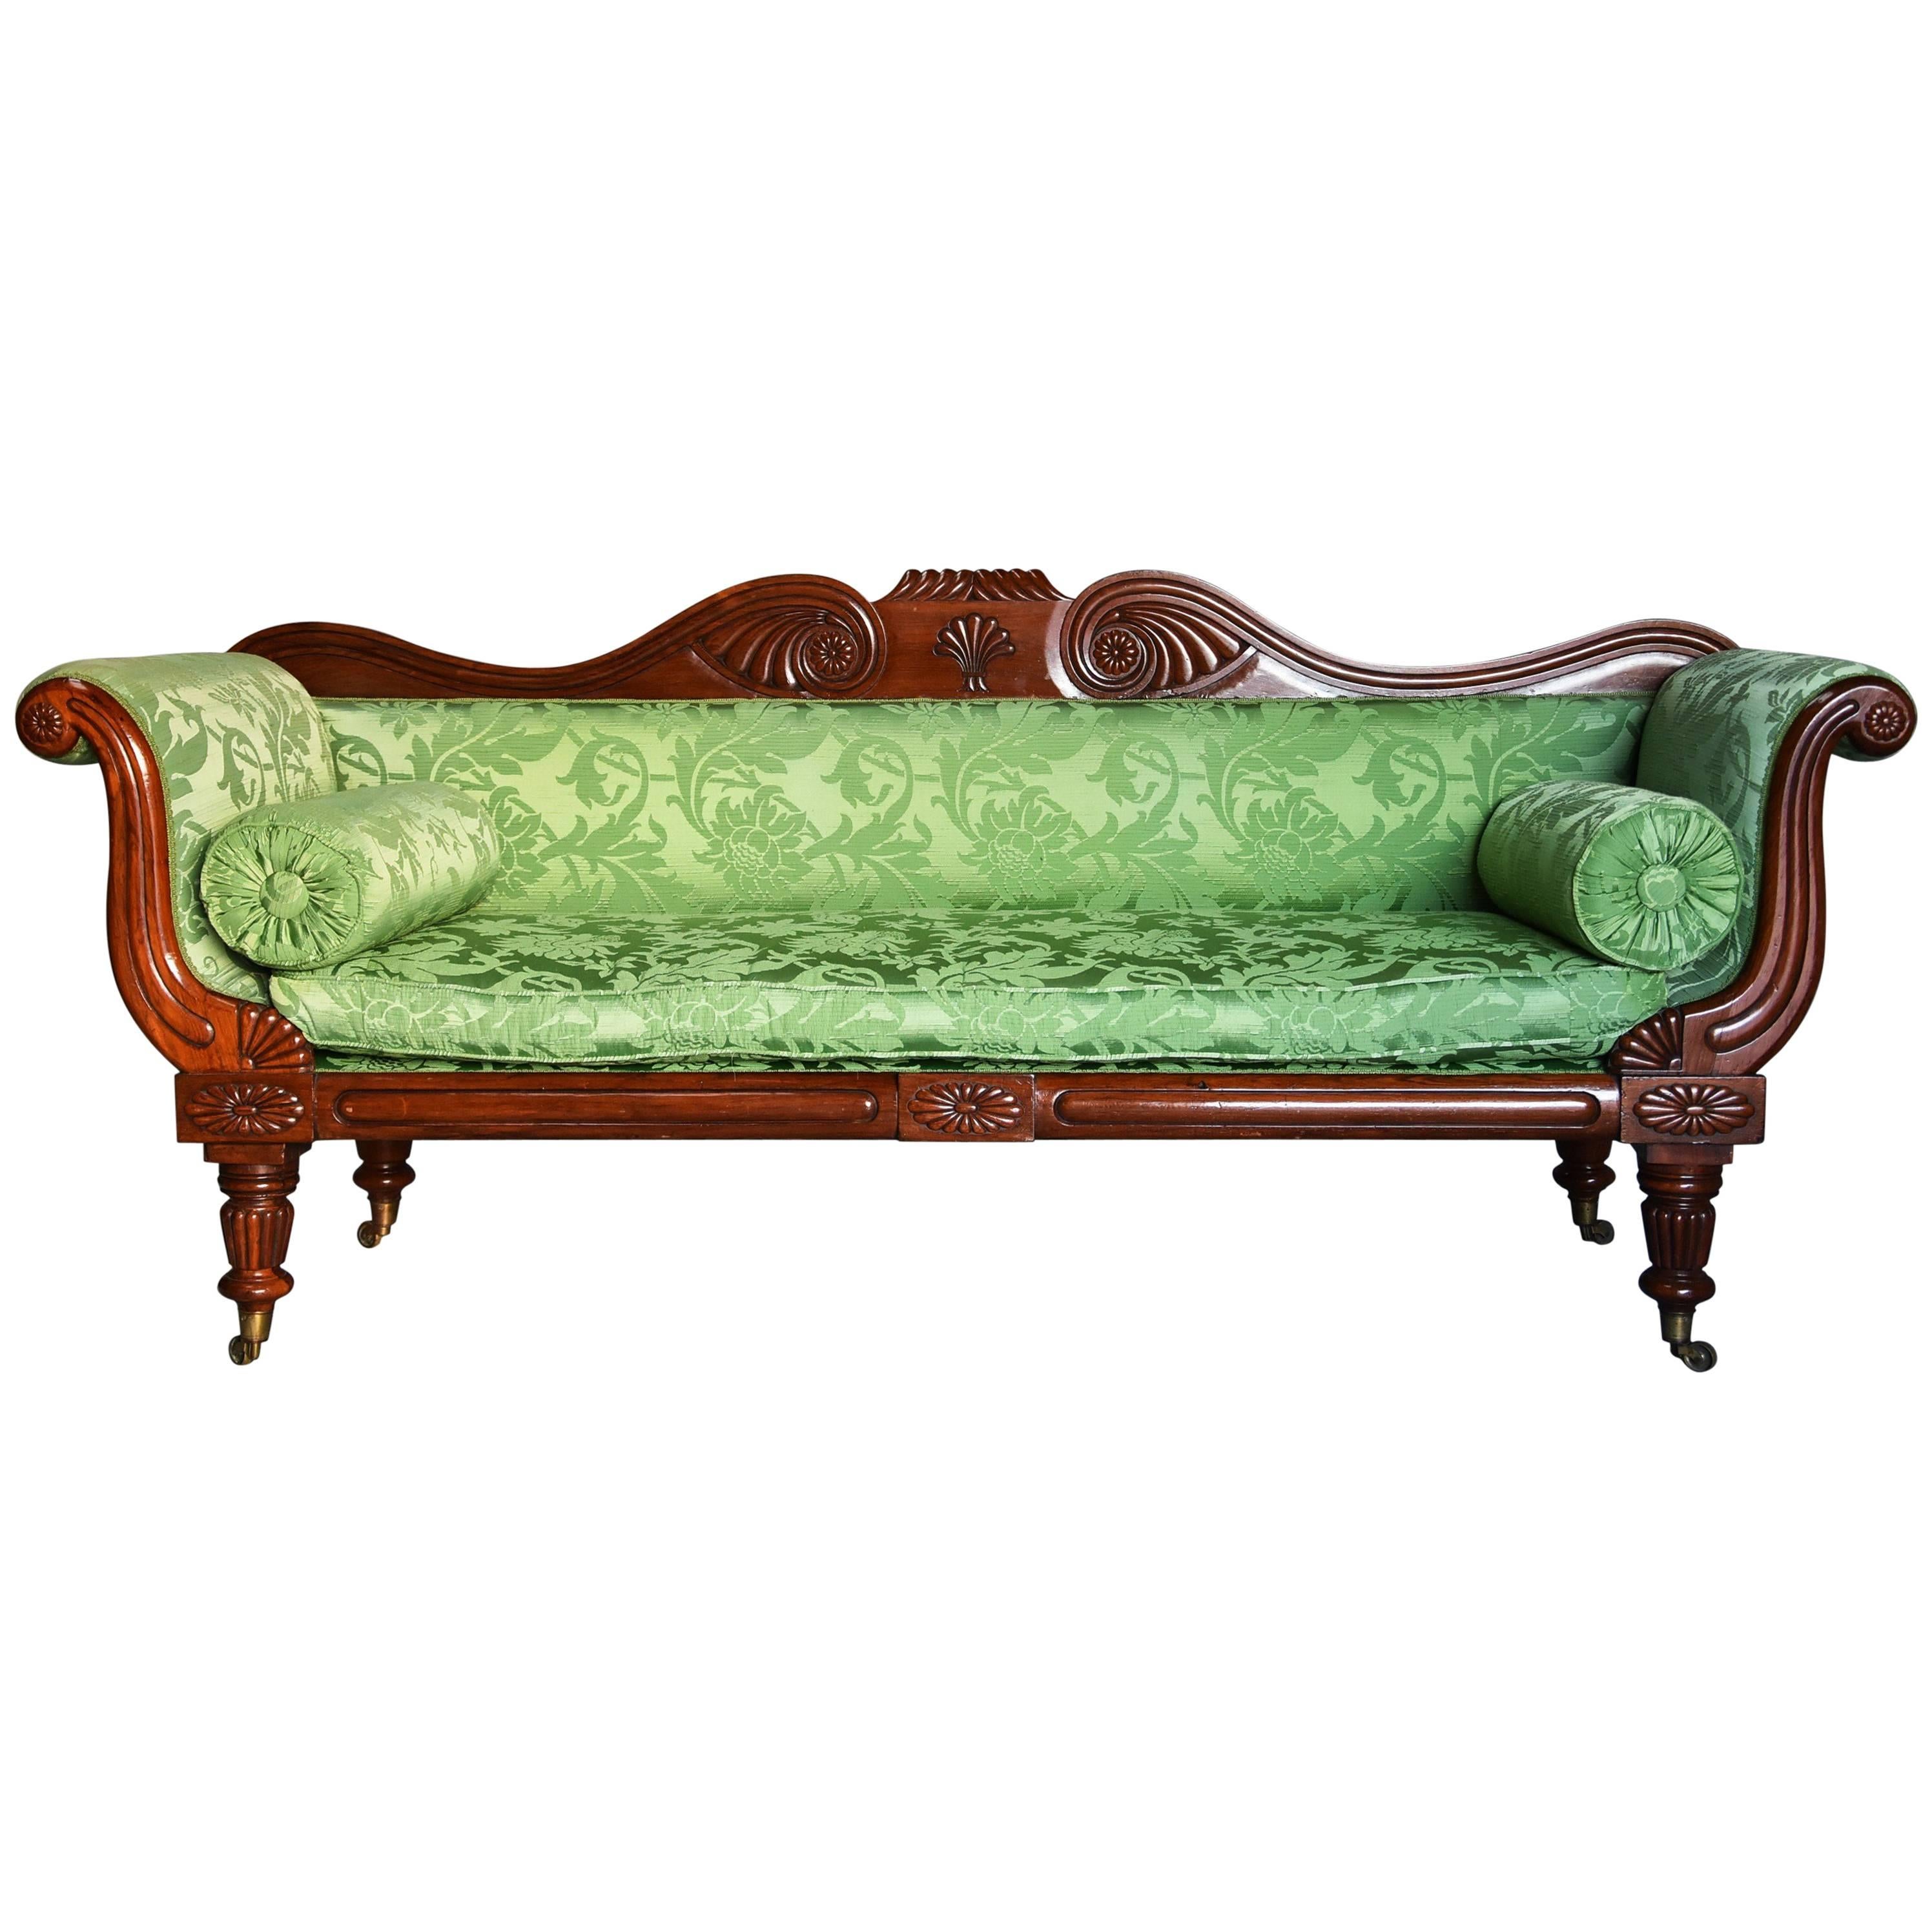 Late Regency Scroll End Mahogany Sofa with green silk upholstery For Sale